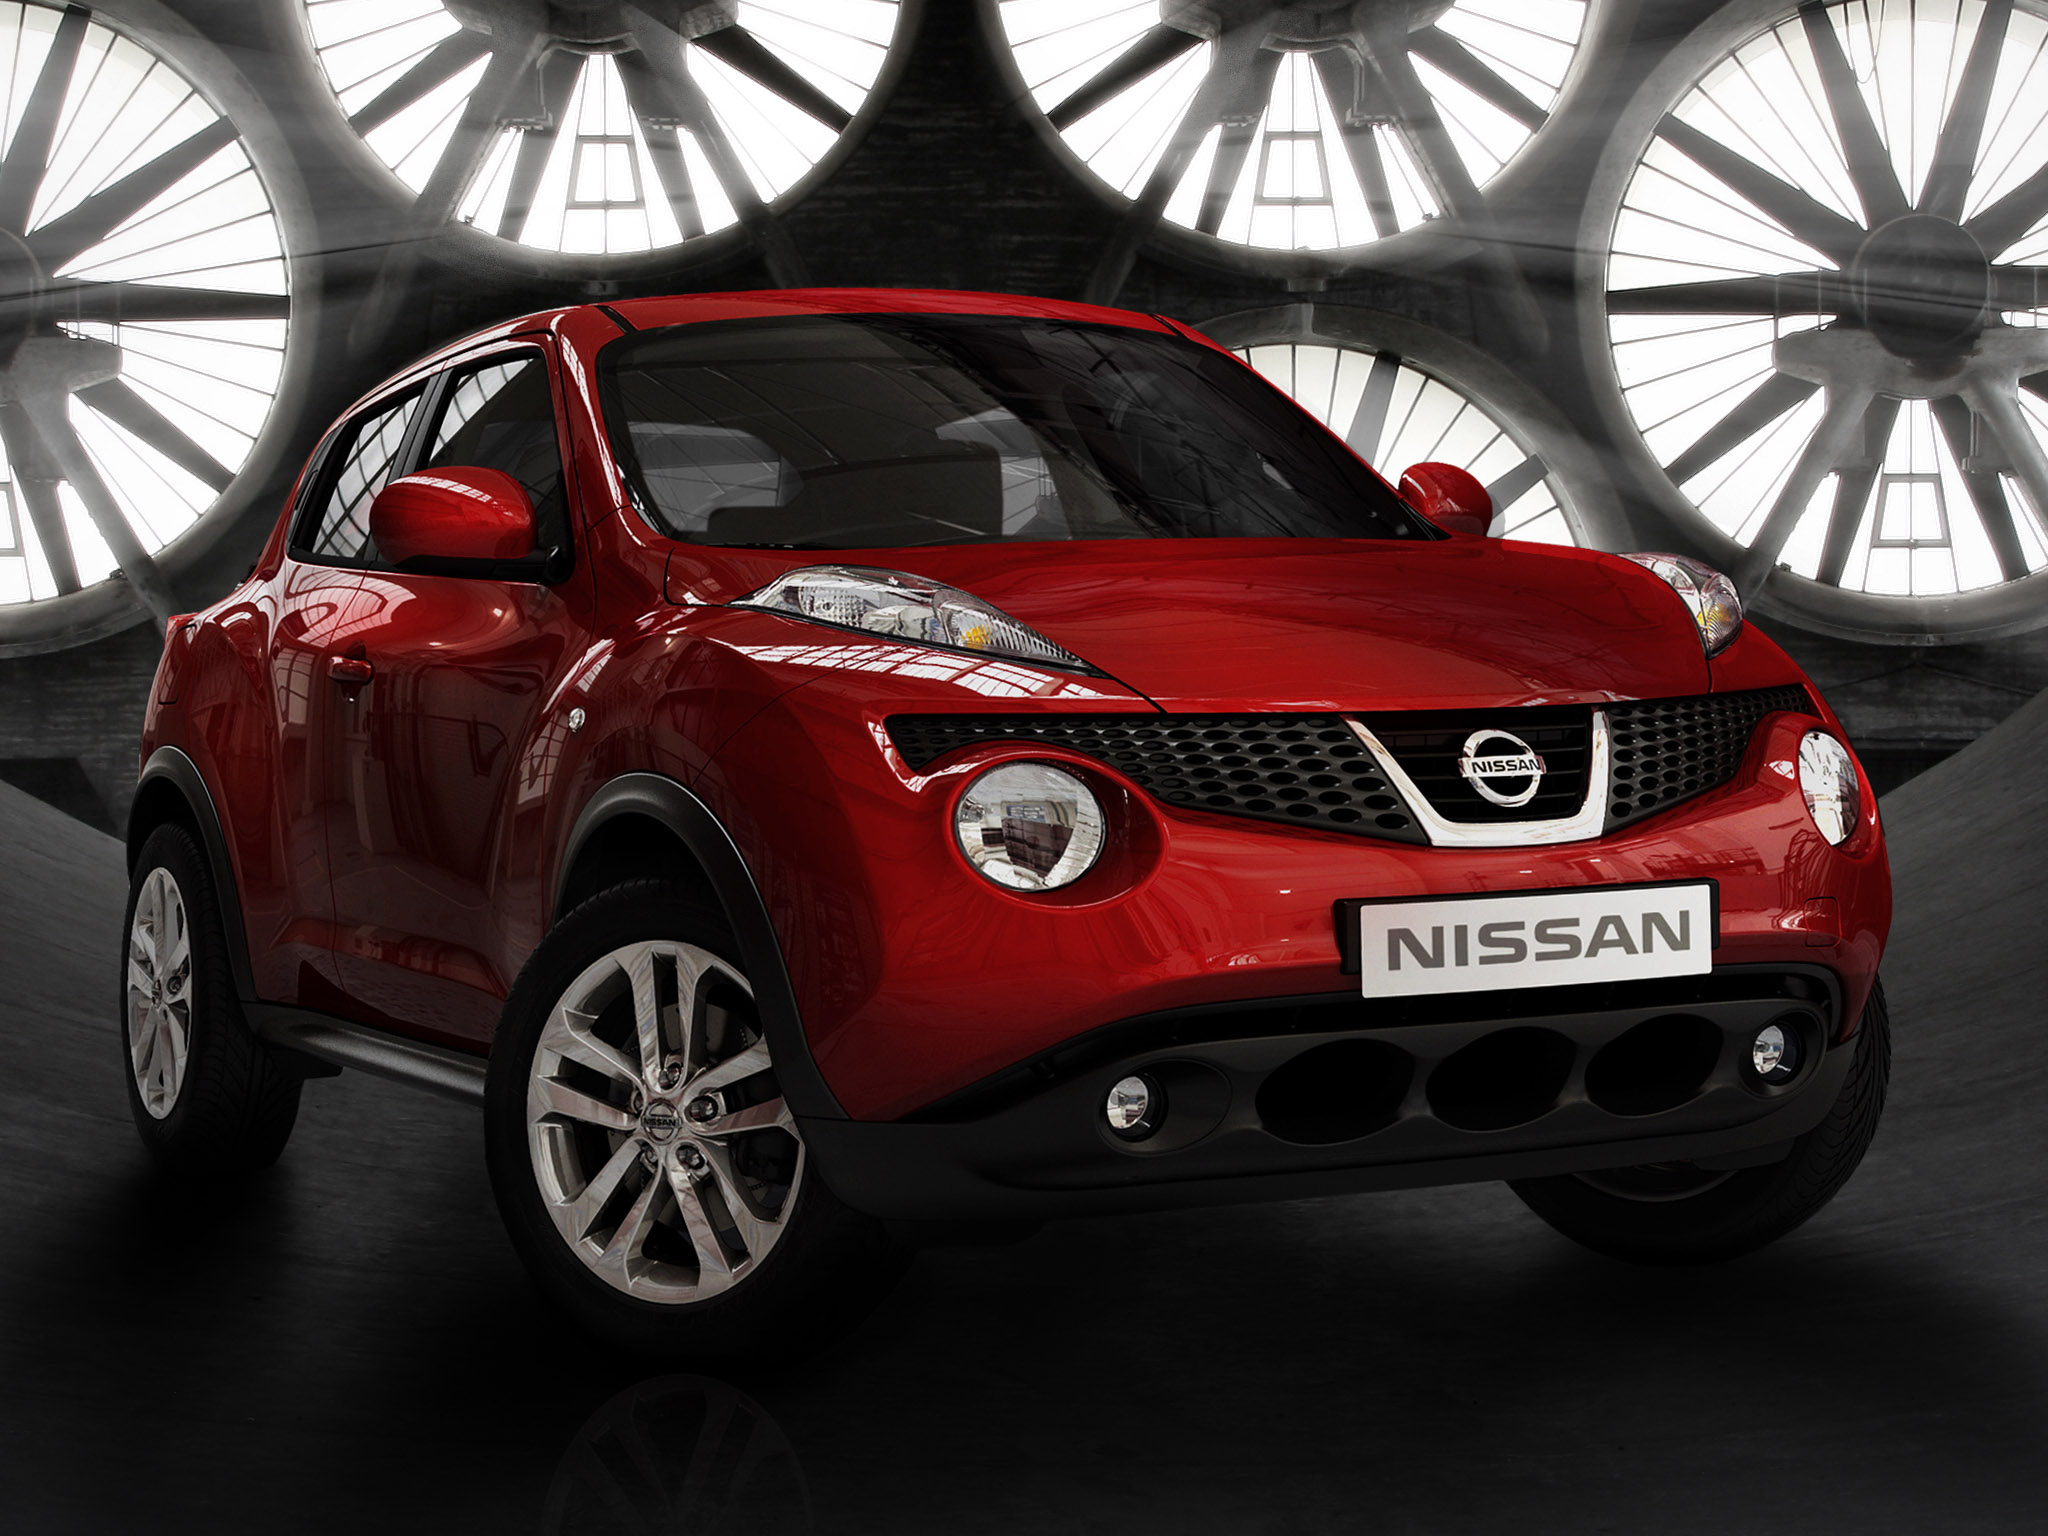 Nissan Juke 2007 Review, Amazing Pictures and Images